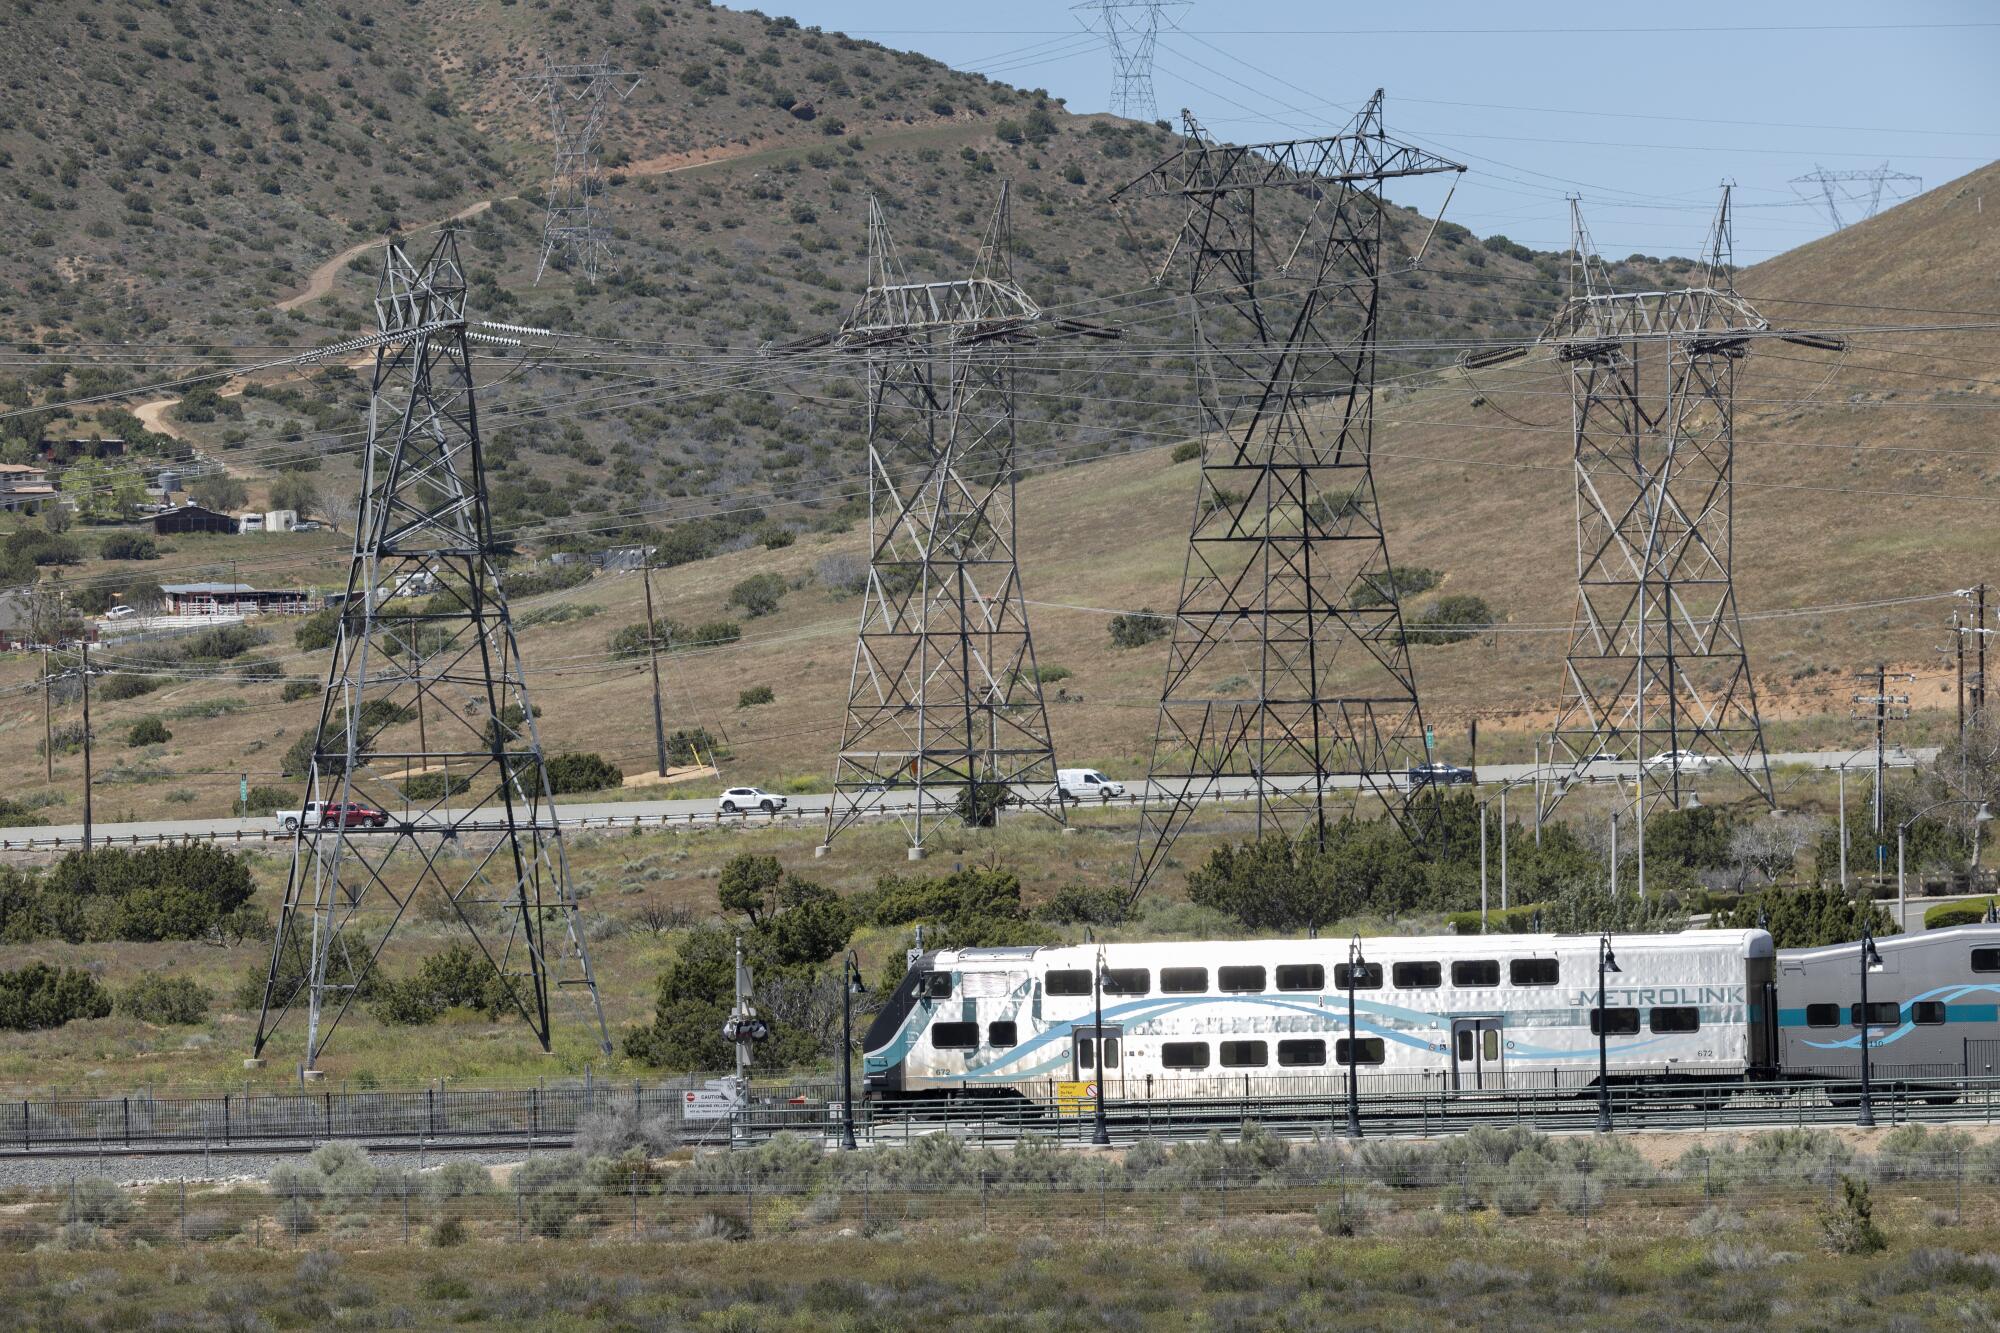 A white train is seen amid a landscape of brown hills with patches of shrubs